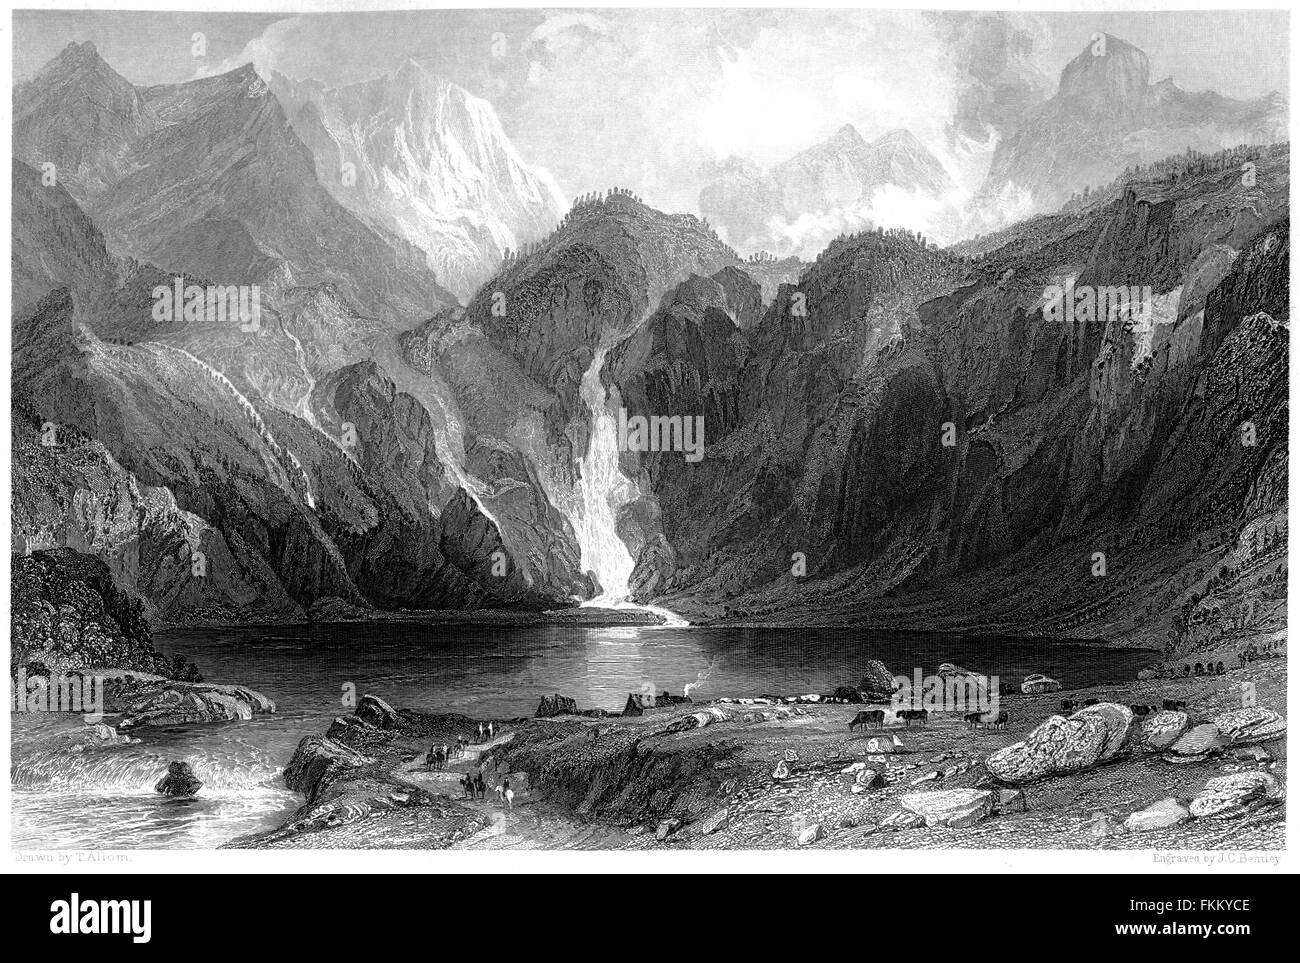 An engraving of Lake d'Oo, High Pyrenees scanned at high resolution from a book printed in 1876. Believed copyright free. Stock Photo